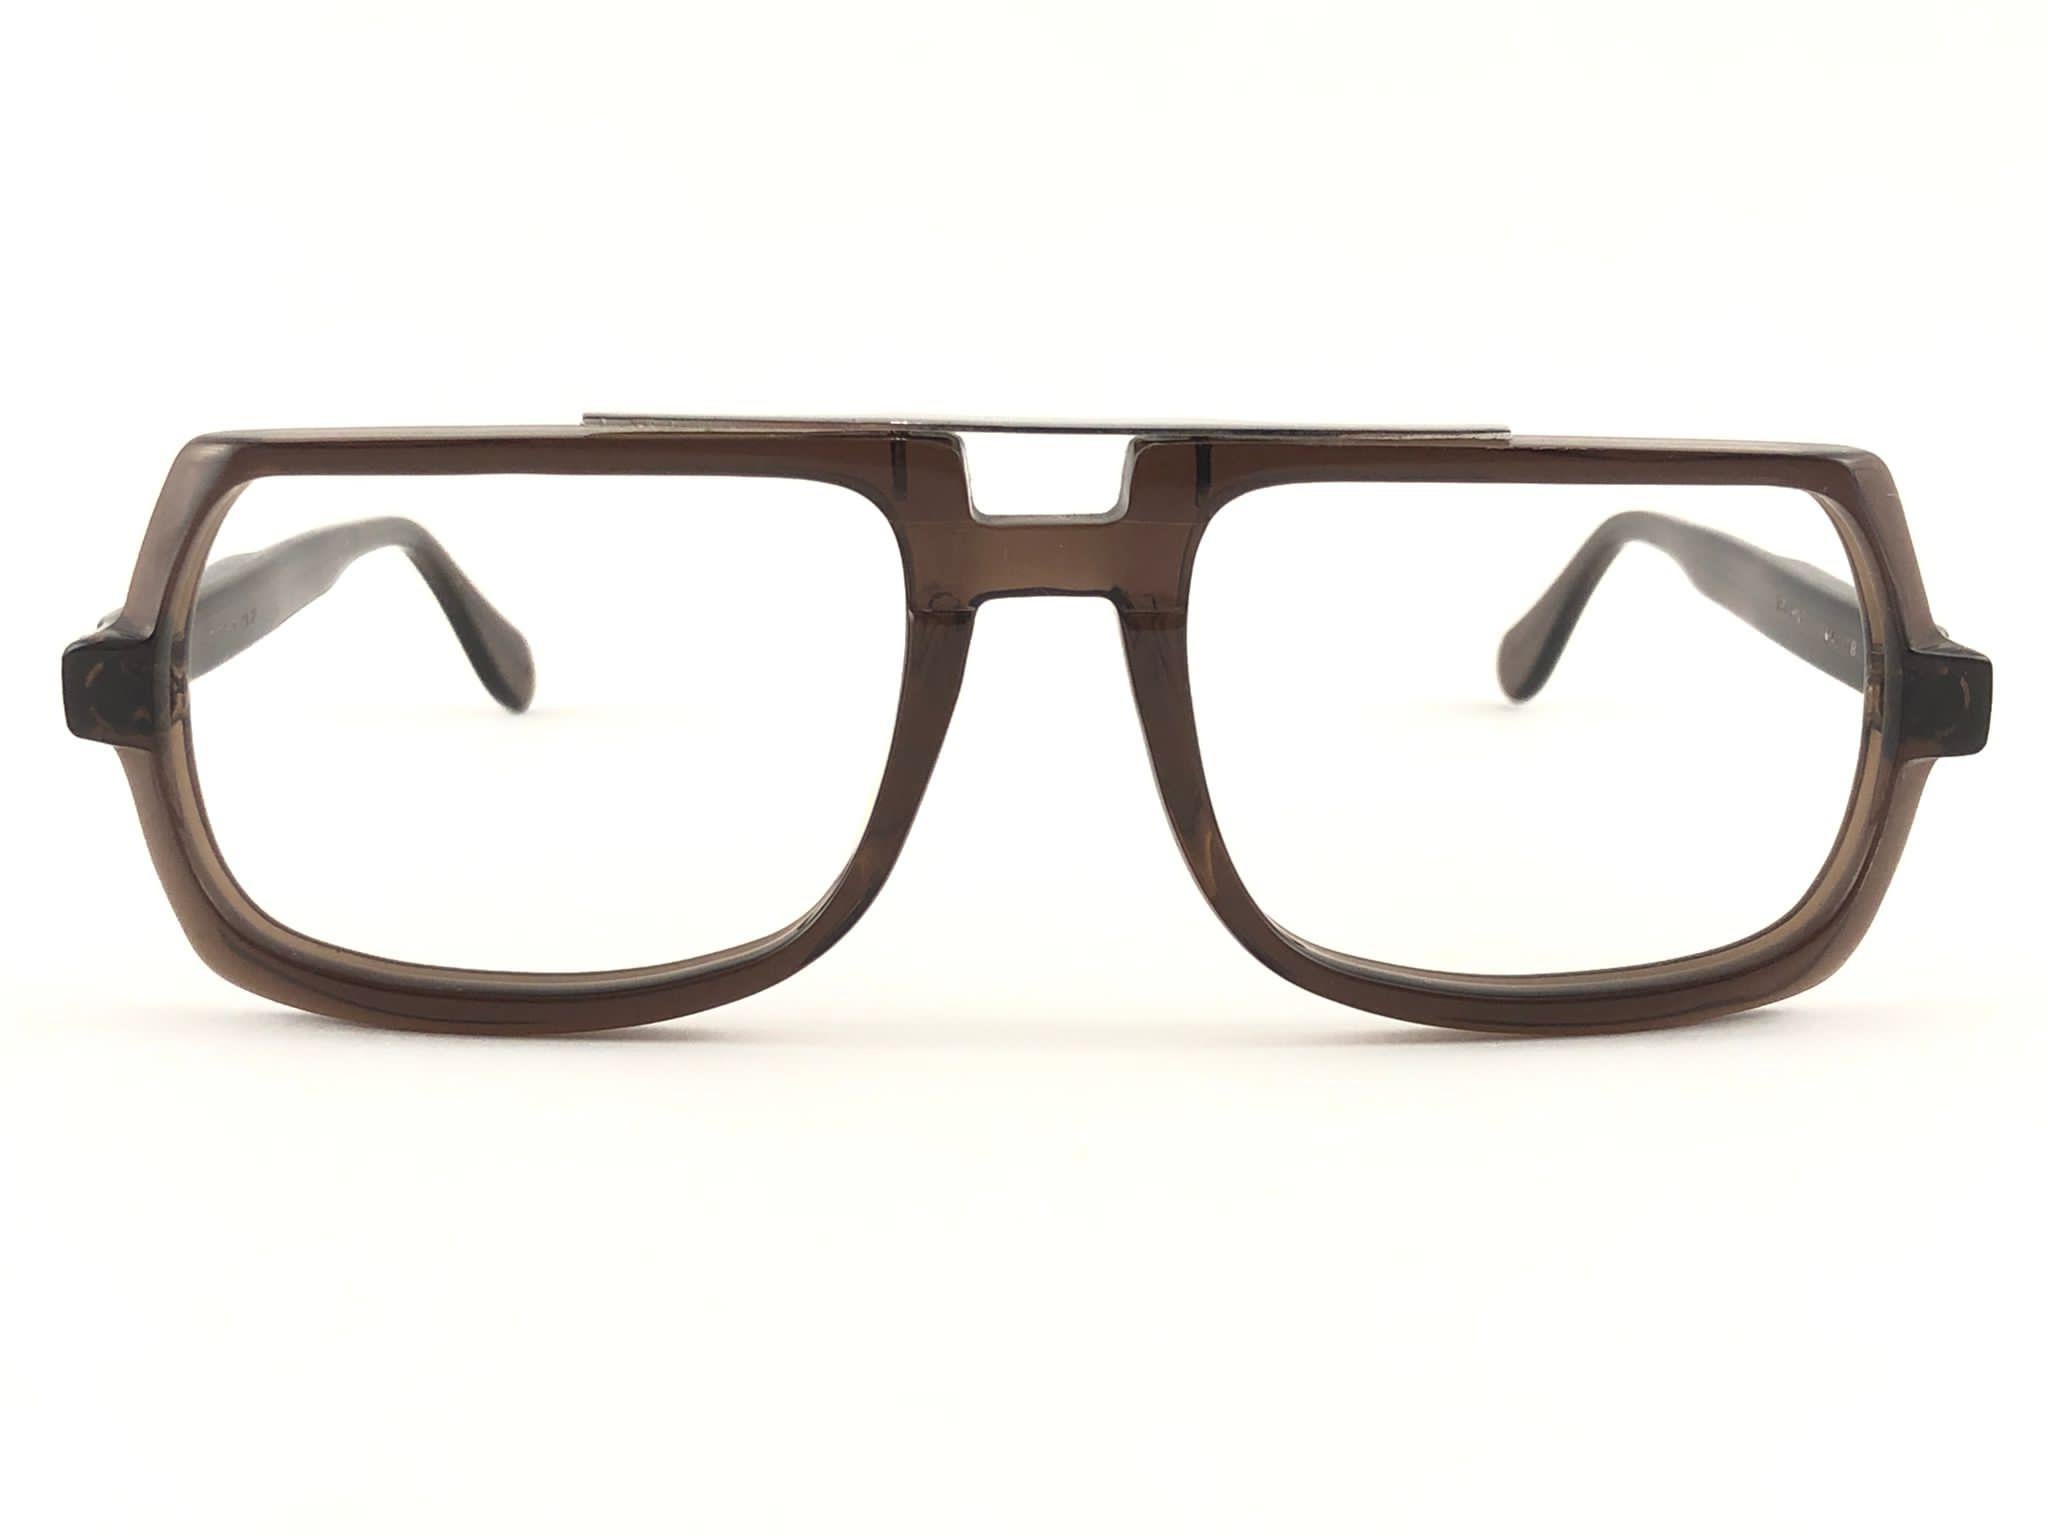 New Vintage Neostyle small sleek brown frame ready for your prescription lenses.

Made in Germany.
 
Produced and design in 1990's.

This item may show minor sign of wear due to storage.


FRONT : 13.5   CMS

LENS HEIGHT : 3.7 CMS

LENS WIDTH : 5.2